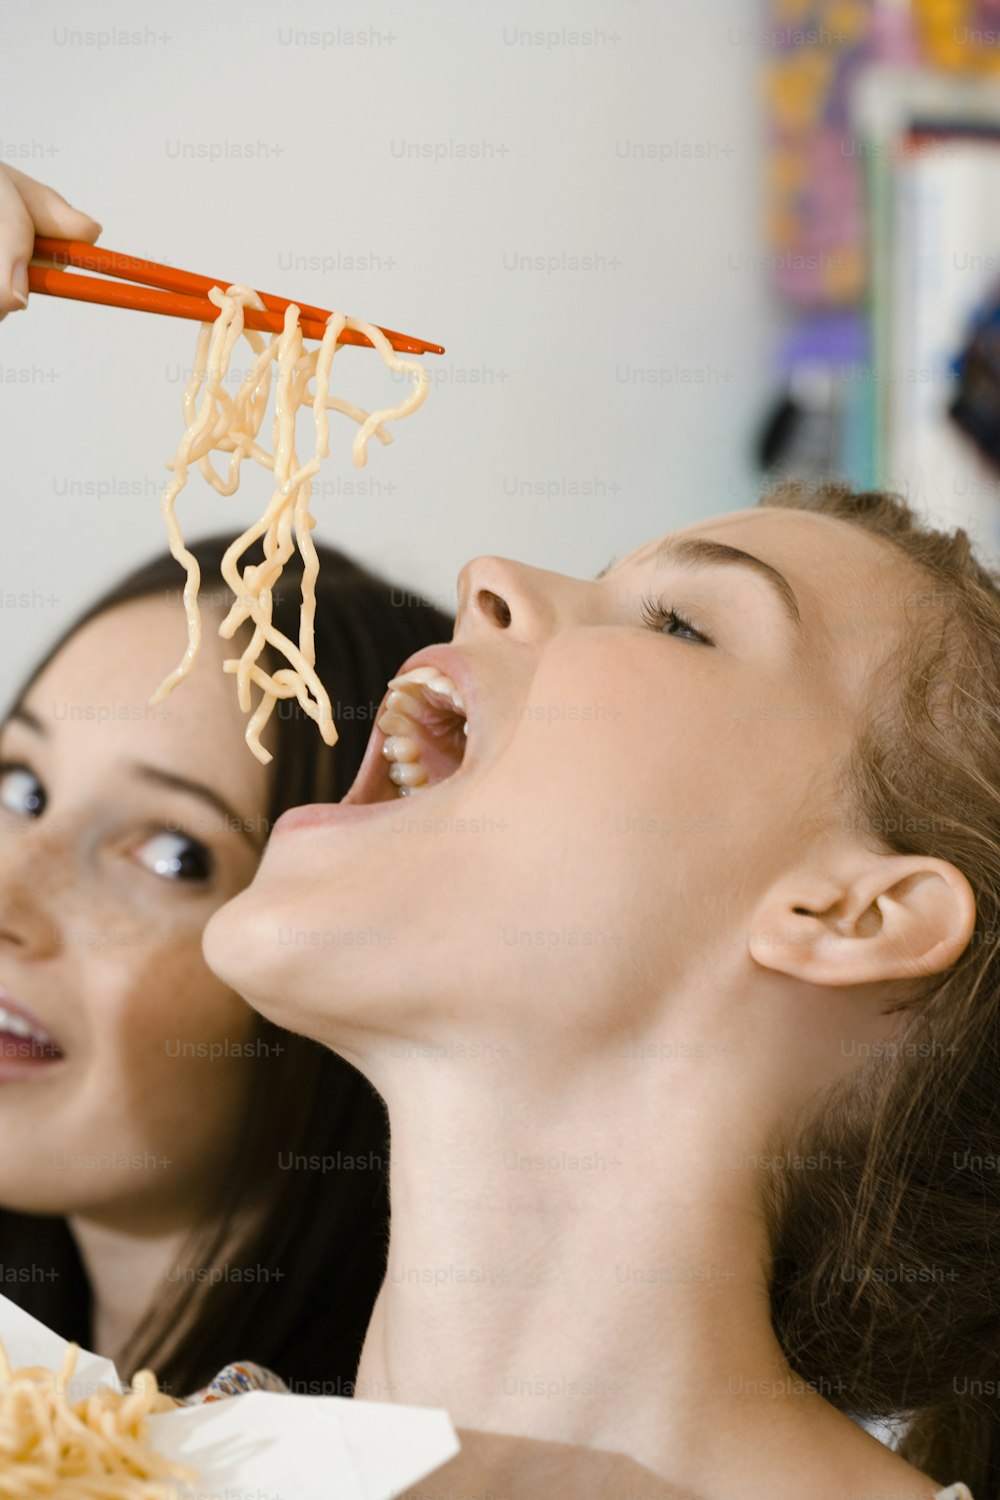 a woman eating noodles with chopsticks while another woman looks on